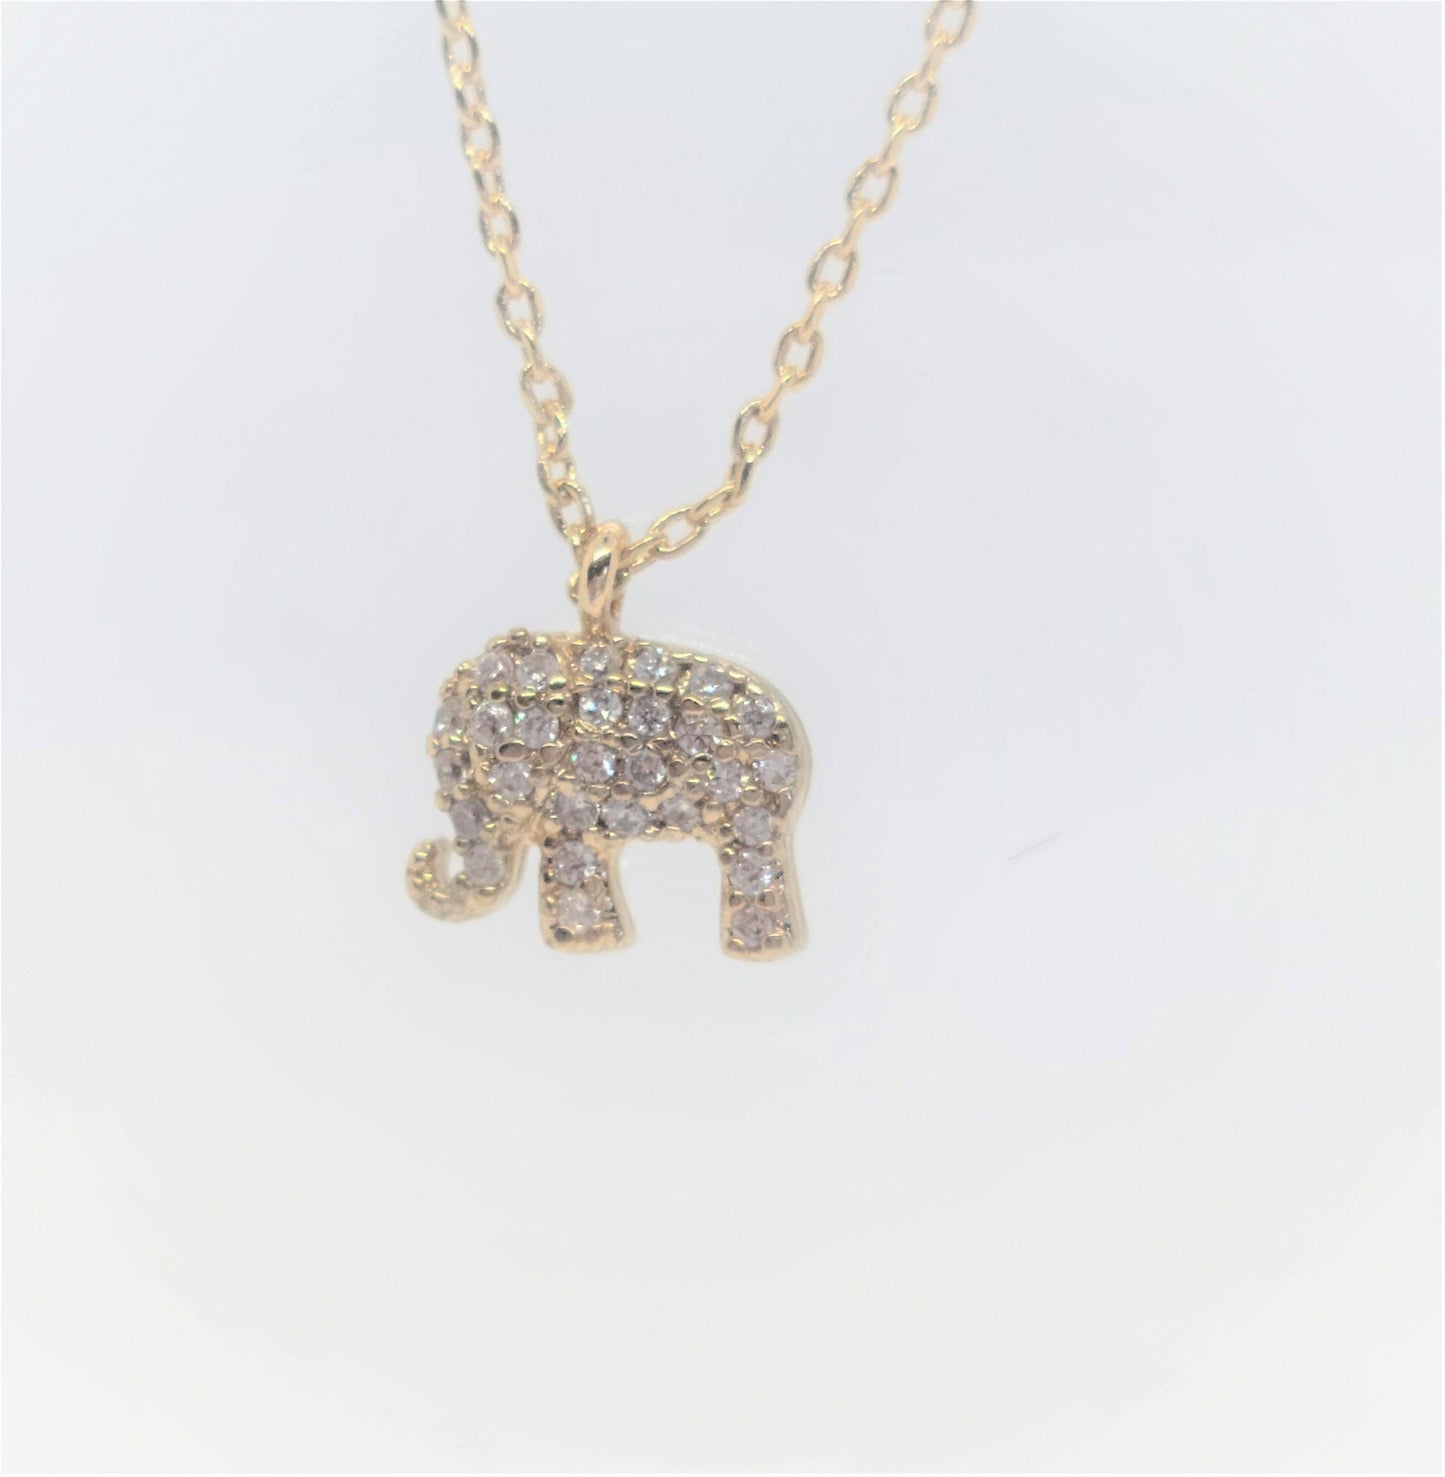 Elephant Necklace By Recovery Matters